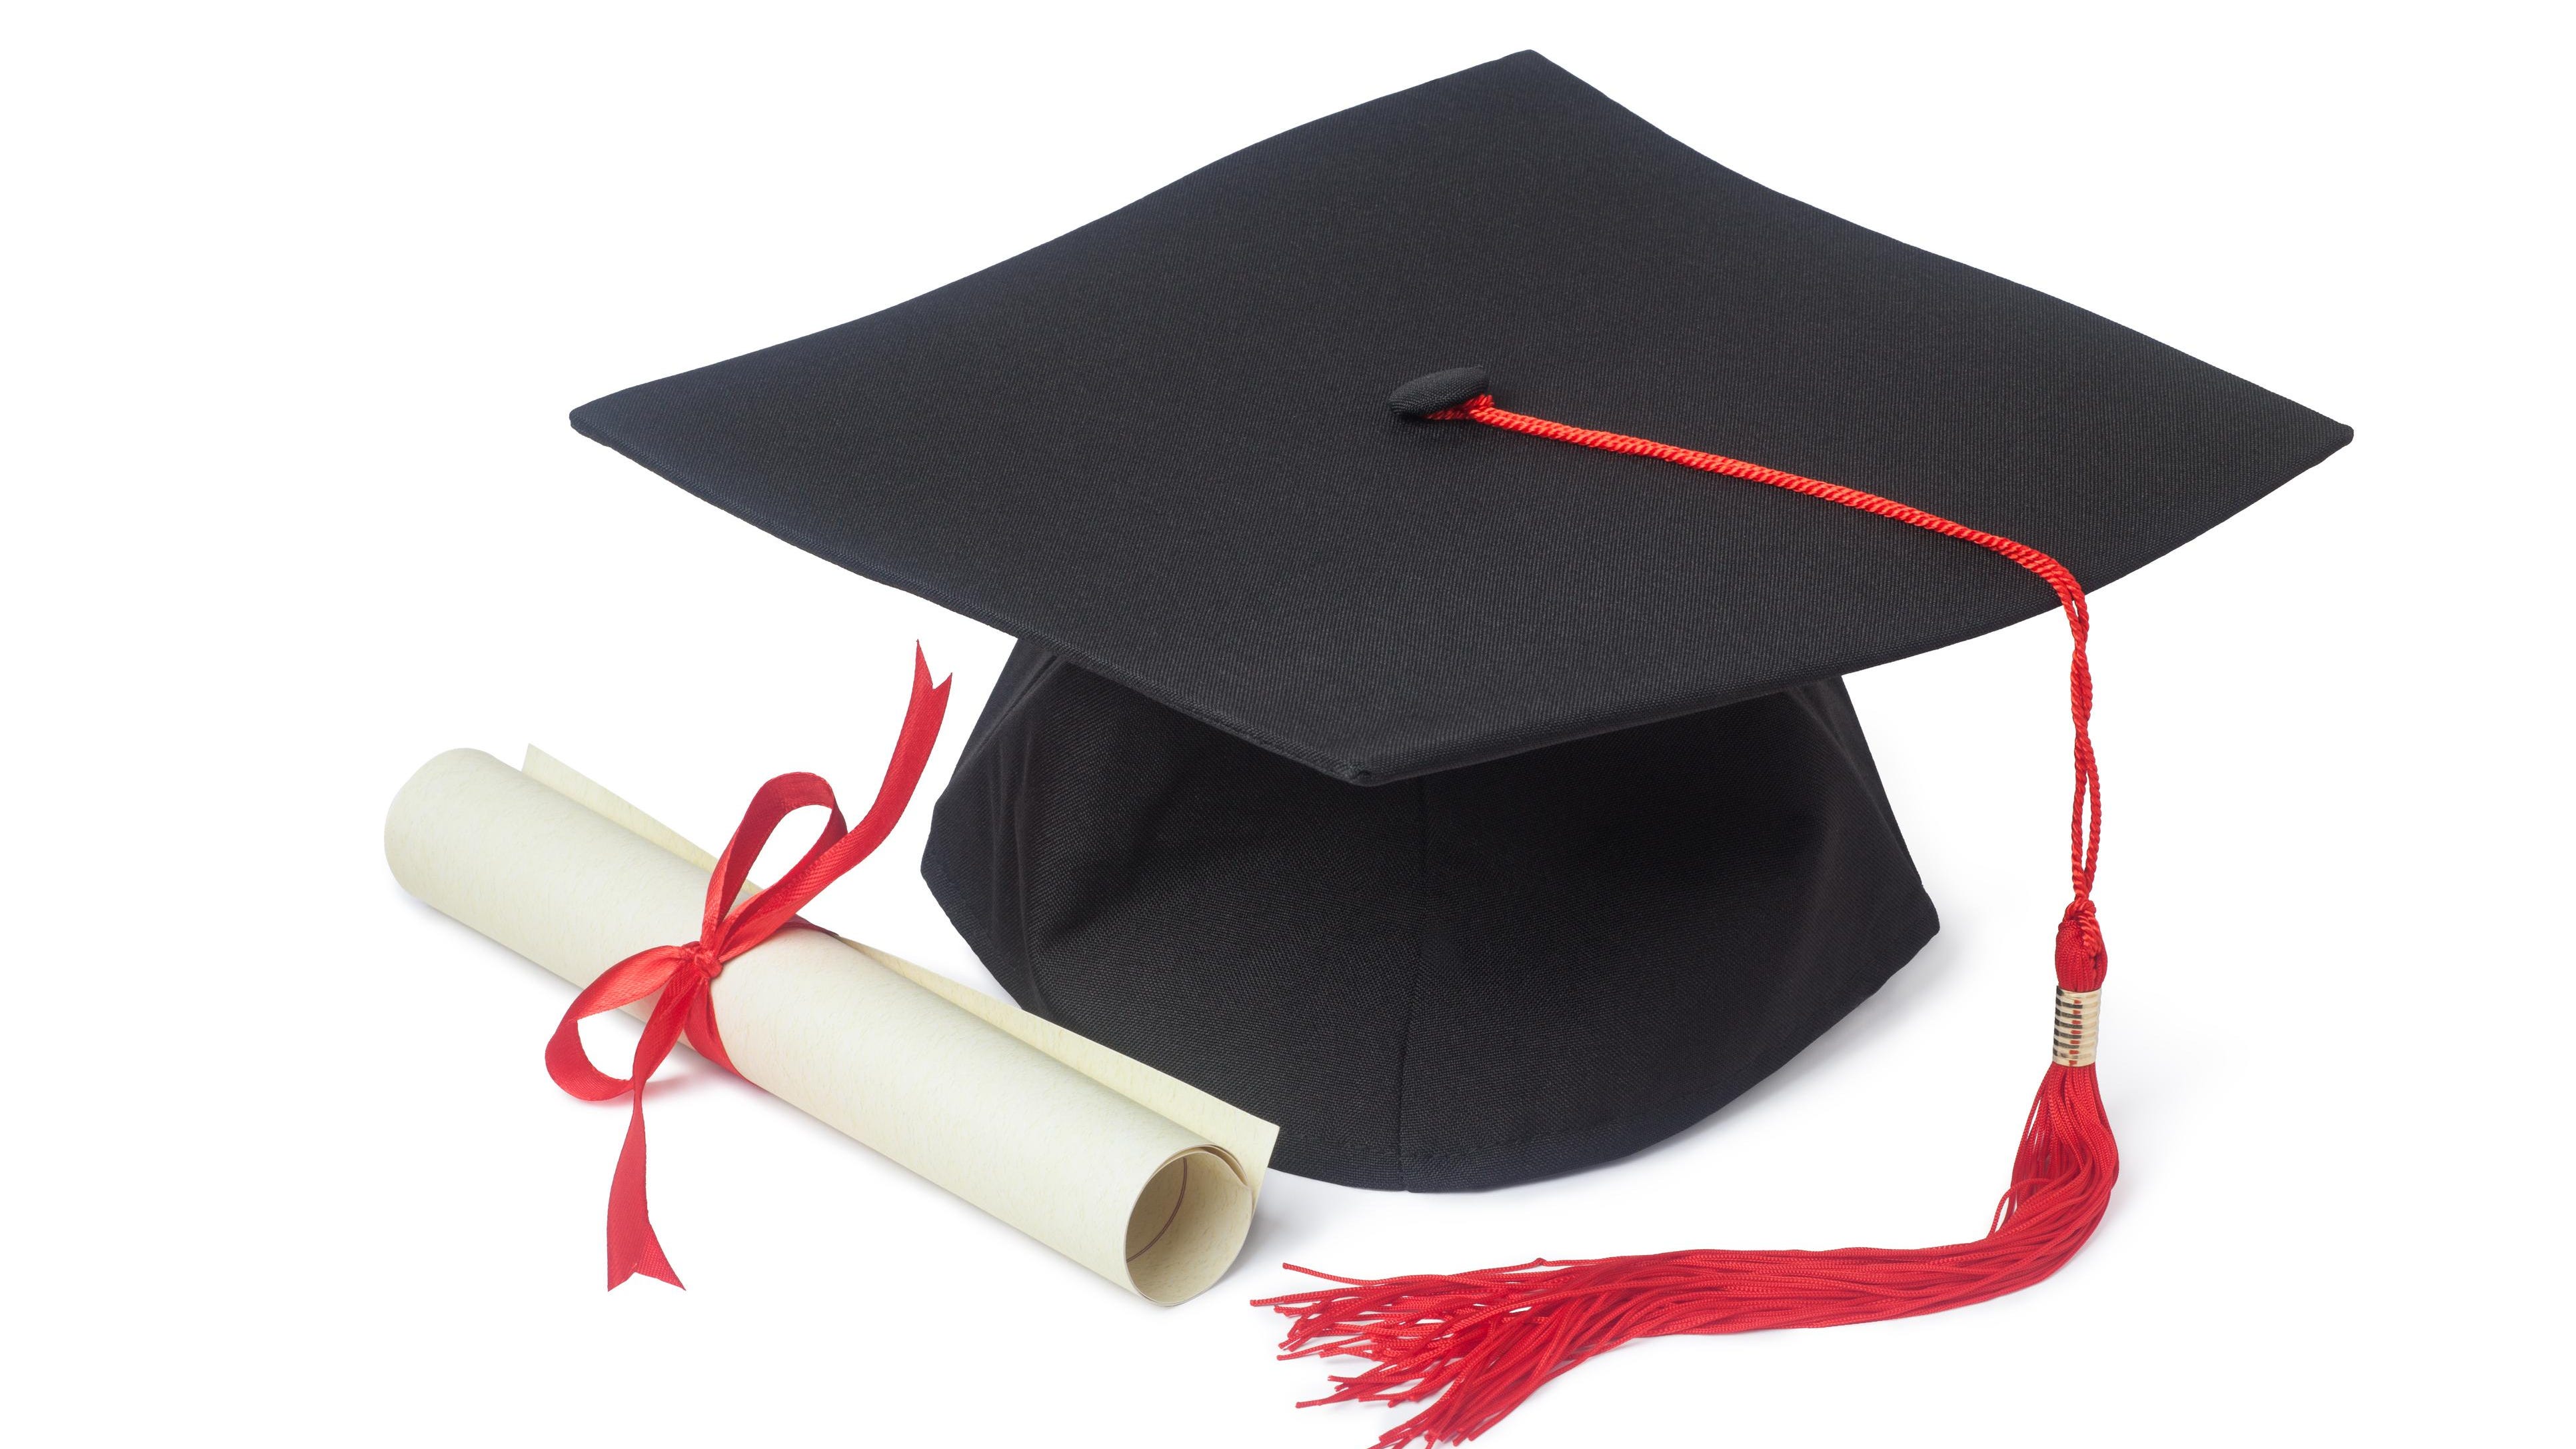 Concern about new graduation requirements grows